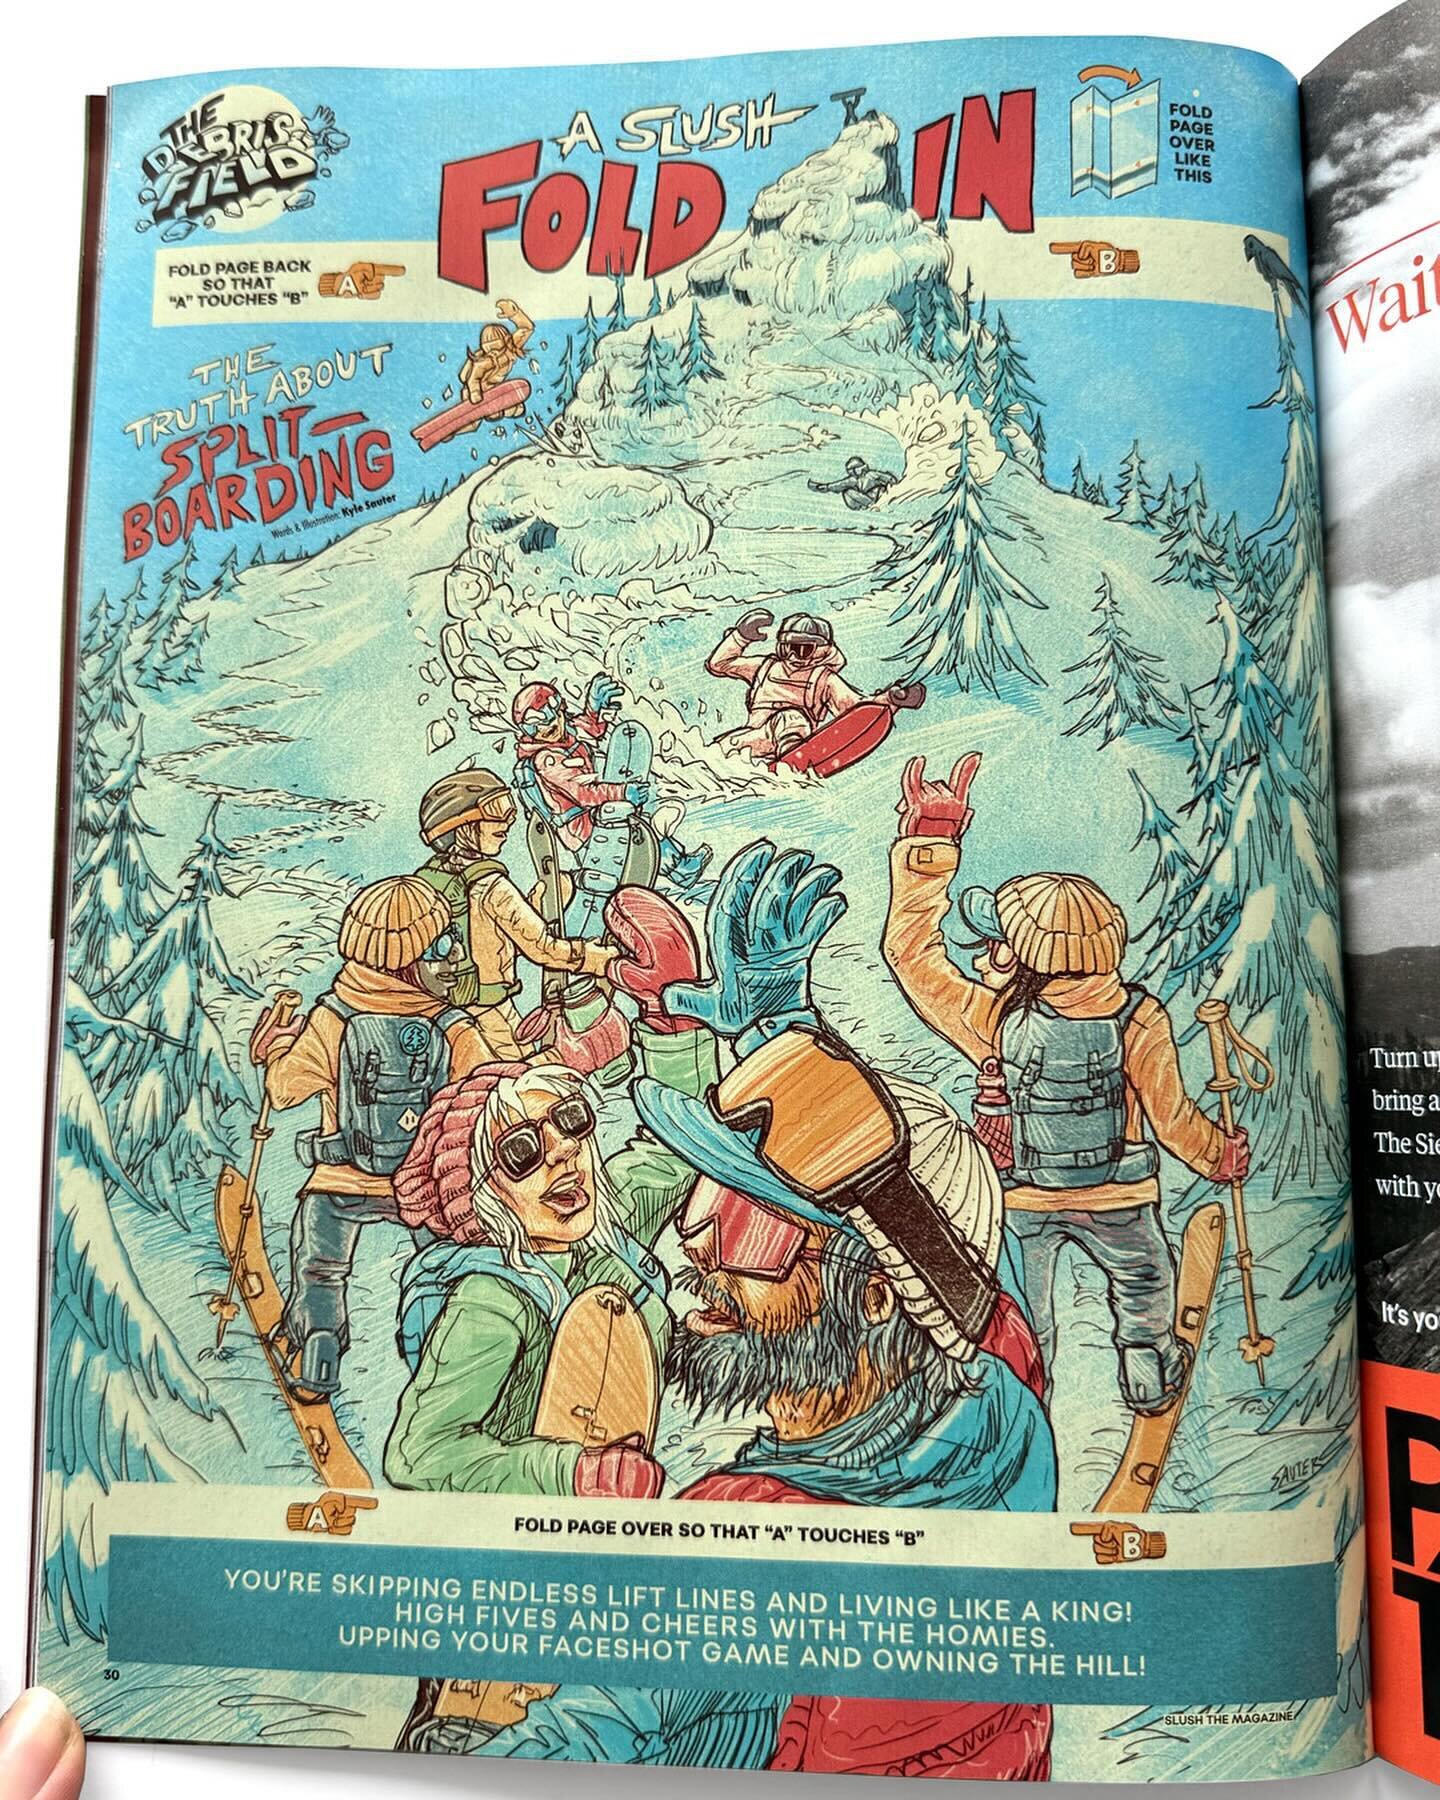 &ldquo;The Truth about Splitboarding&rdquo; for the November issue of @slushthemagazine. I made this as a tribute to the classic &ldquo;Fold-ins&rdquo; of Mad Magazine by the legendary Al Jaffee. Supposedly he always painted the pieces on rigid art-b